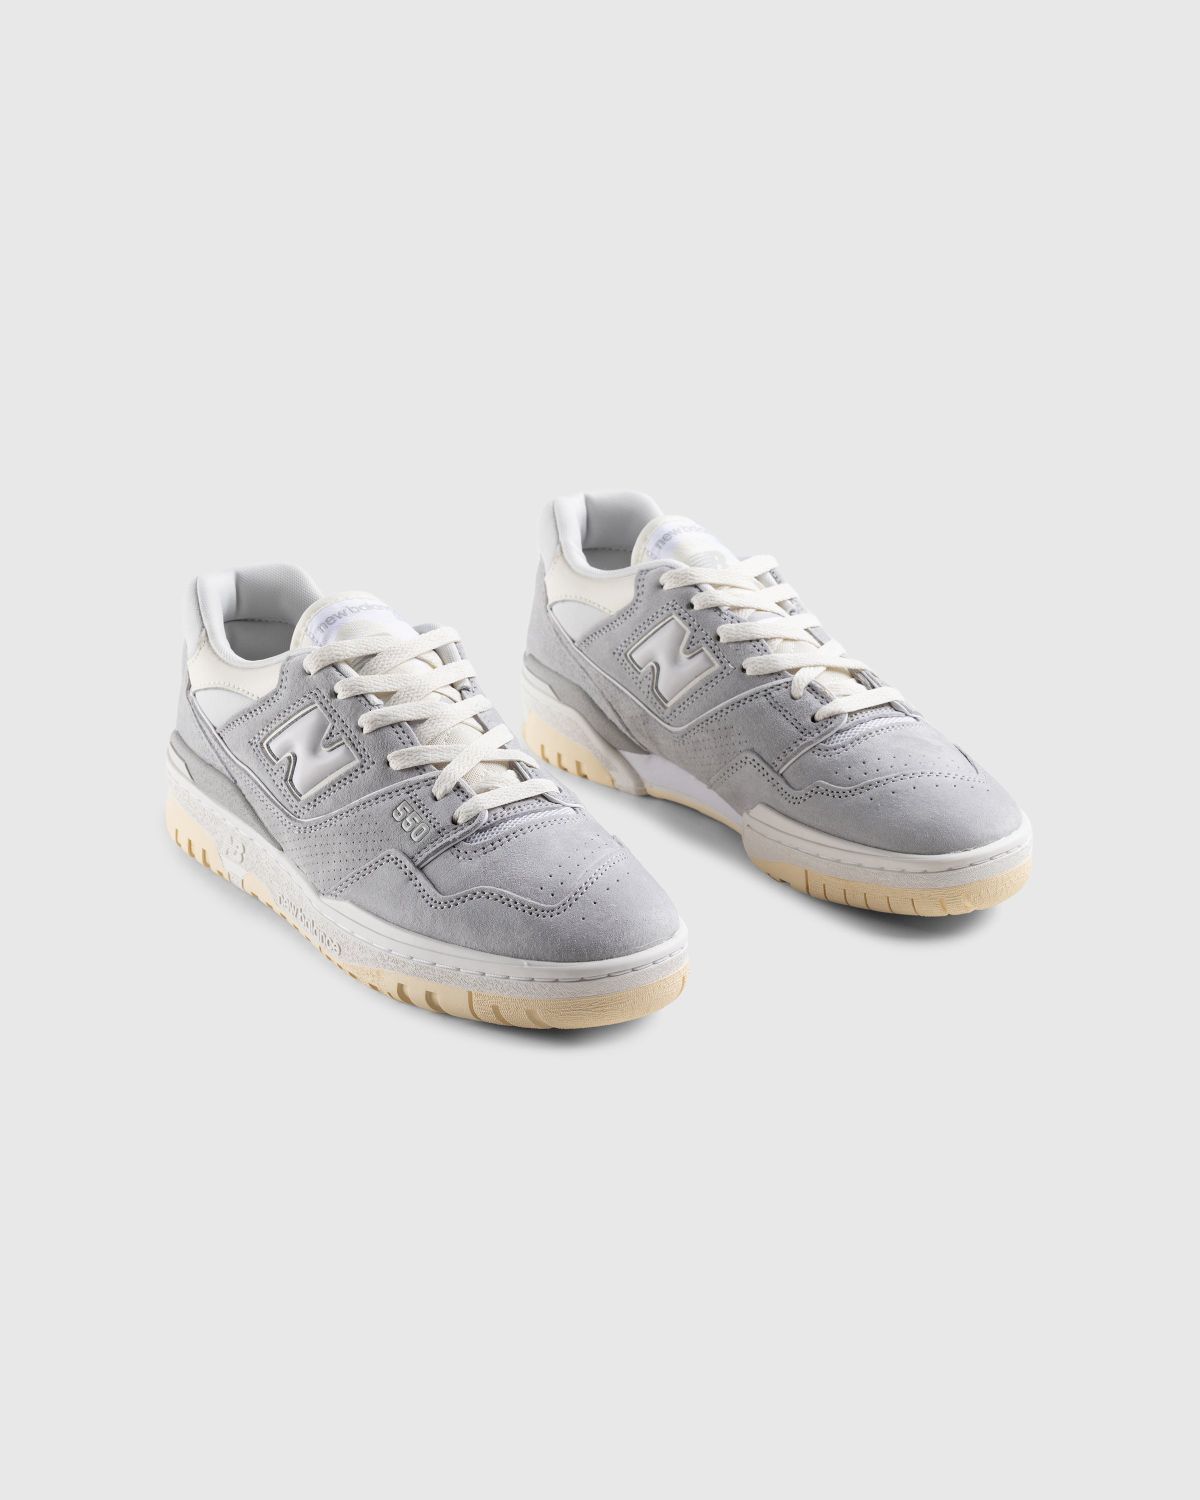 This GREY hits DIFFERENT! New Balance 550 White Grey Castlerock On